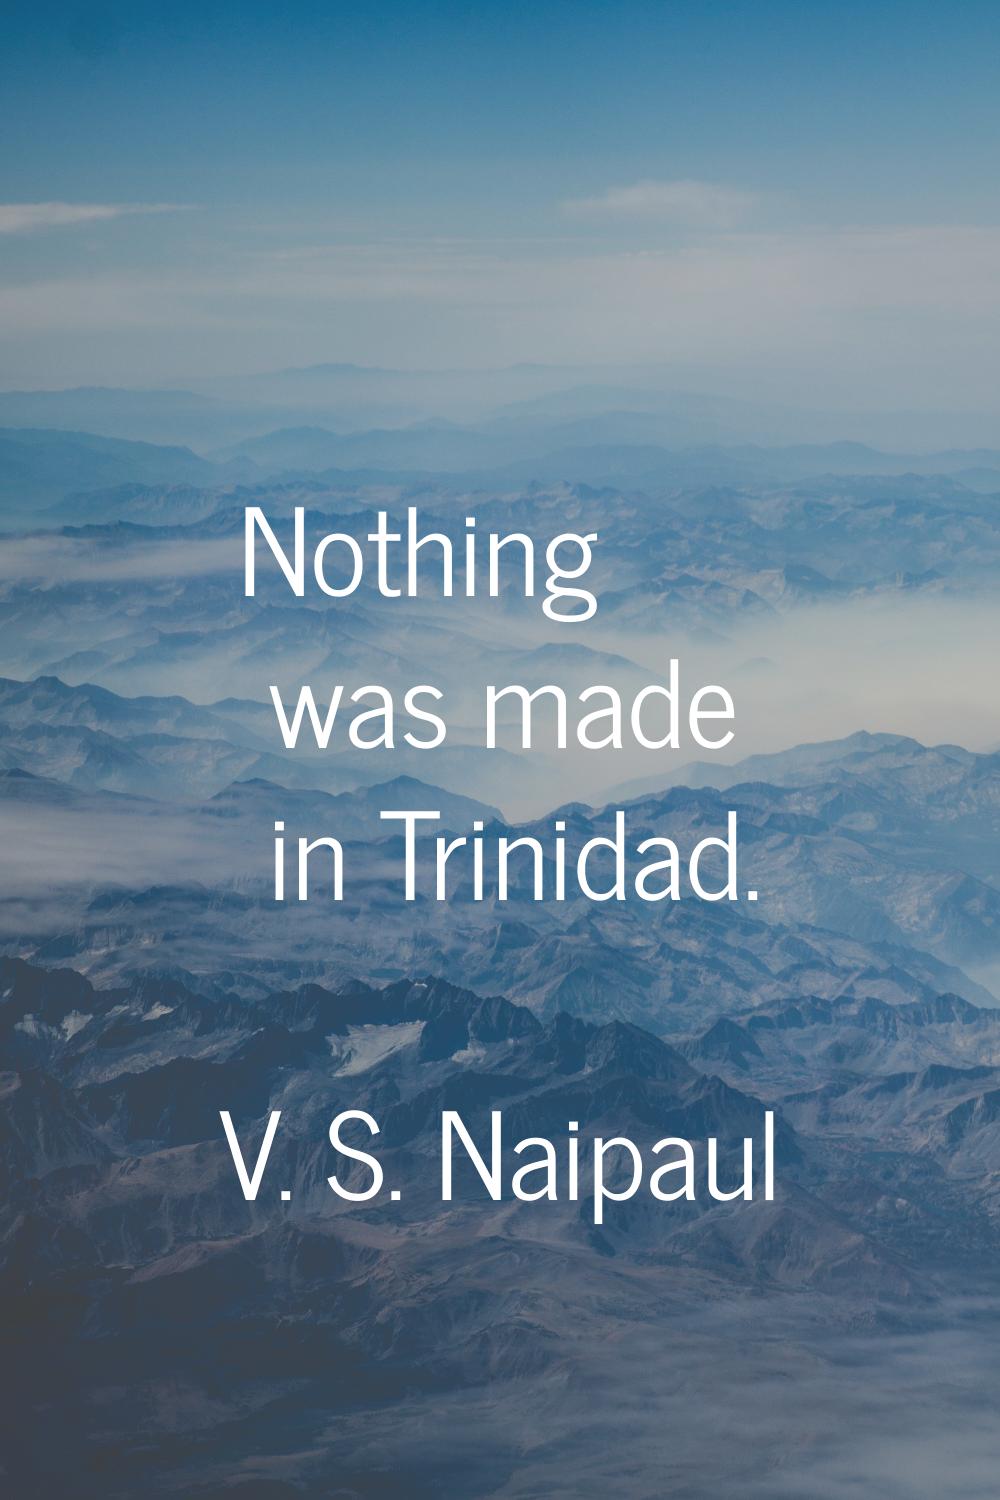 Nothing was made in Trinidad.